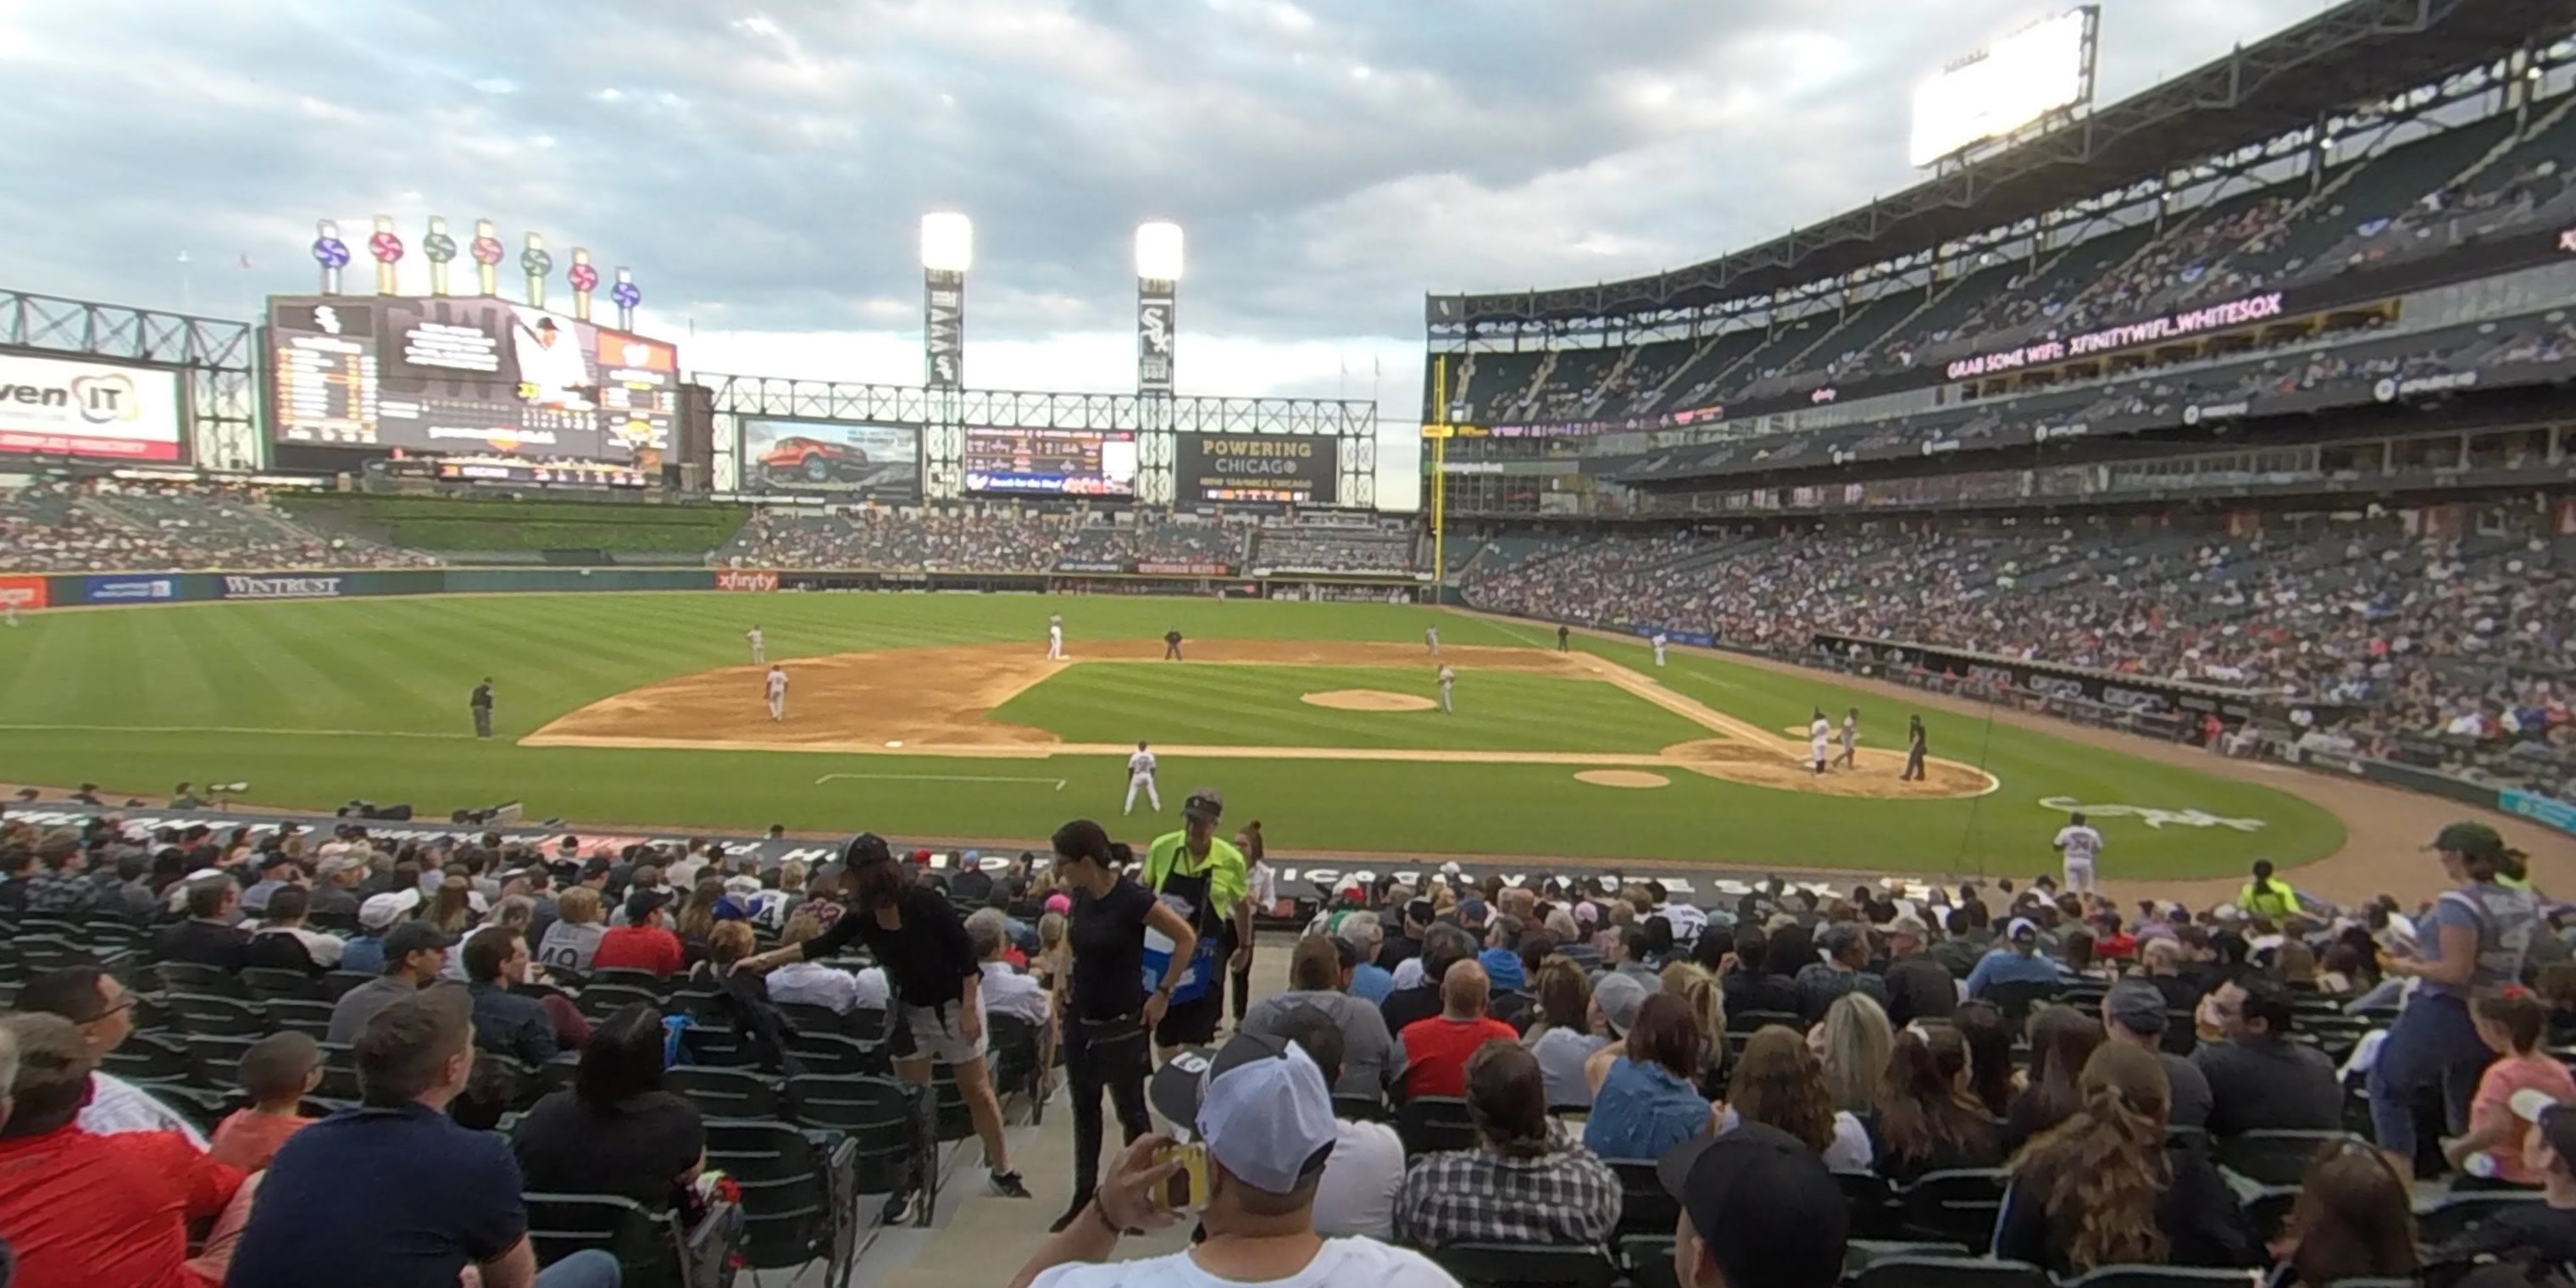 section 138 panoramic seat view  - guaranteed rate field